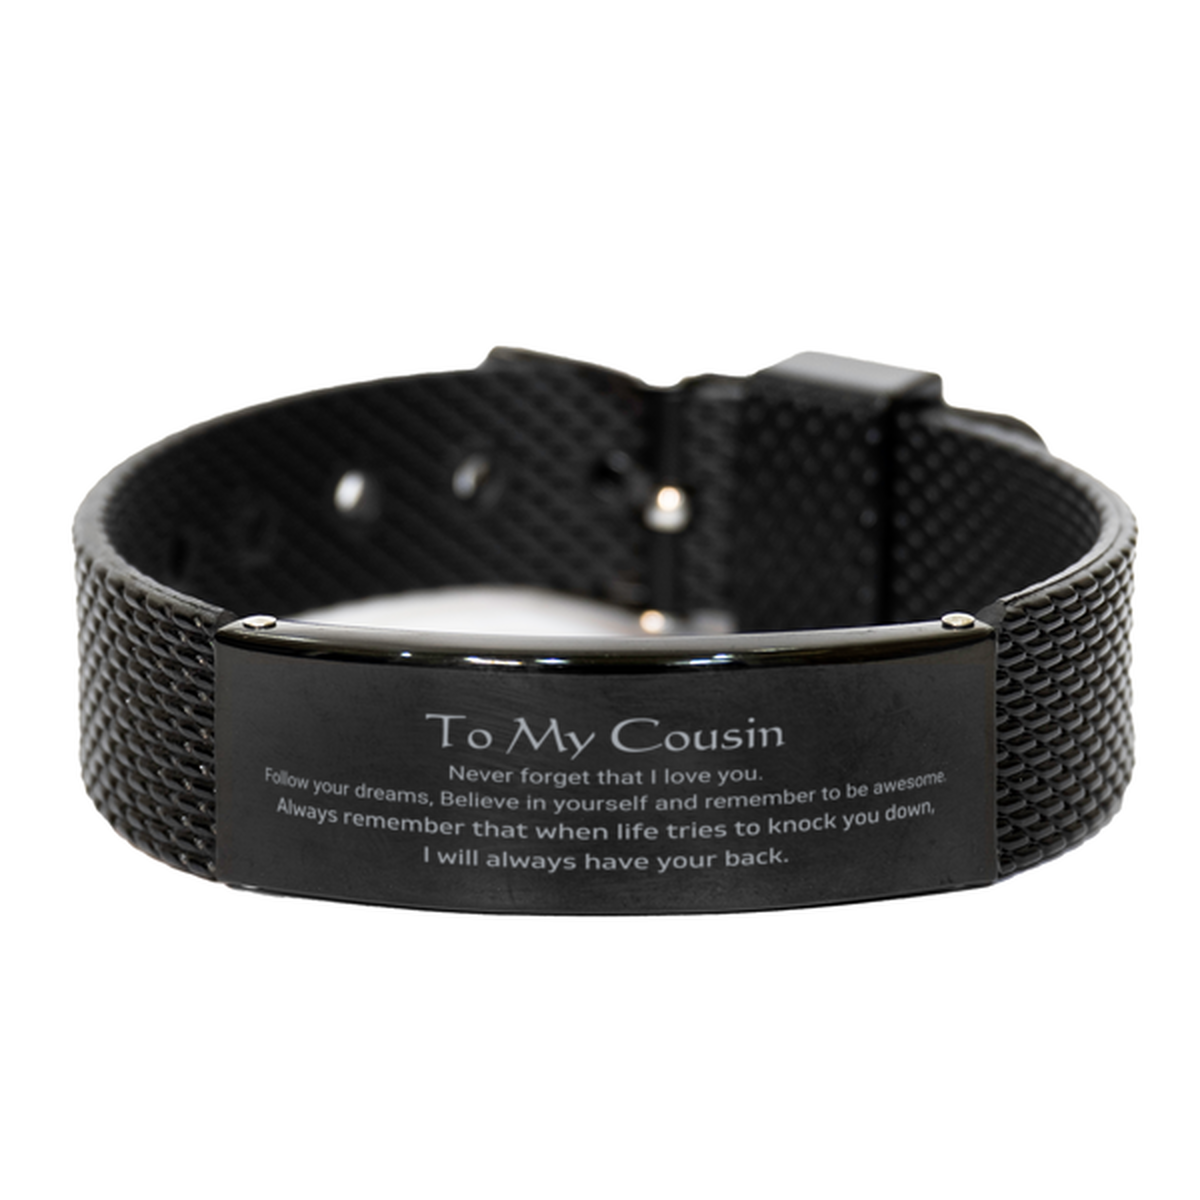 Inspirational Gifts for Cousin, Follow your dreams, Believe in yourself, Cousin Black Shark Mesh Bracelet, Birthday Christmas Unique Gifts For Cousin